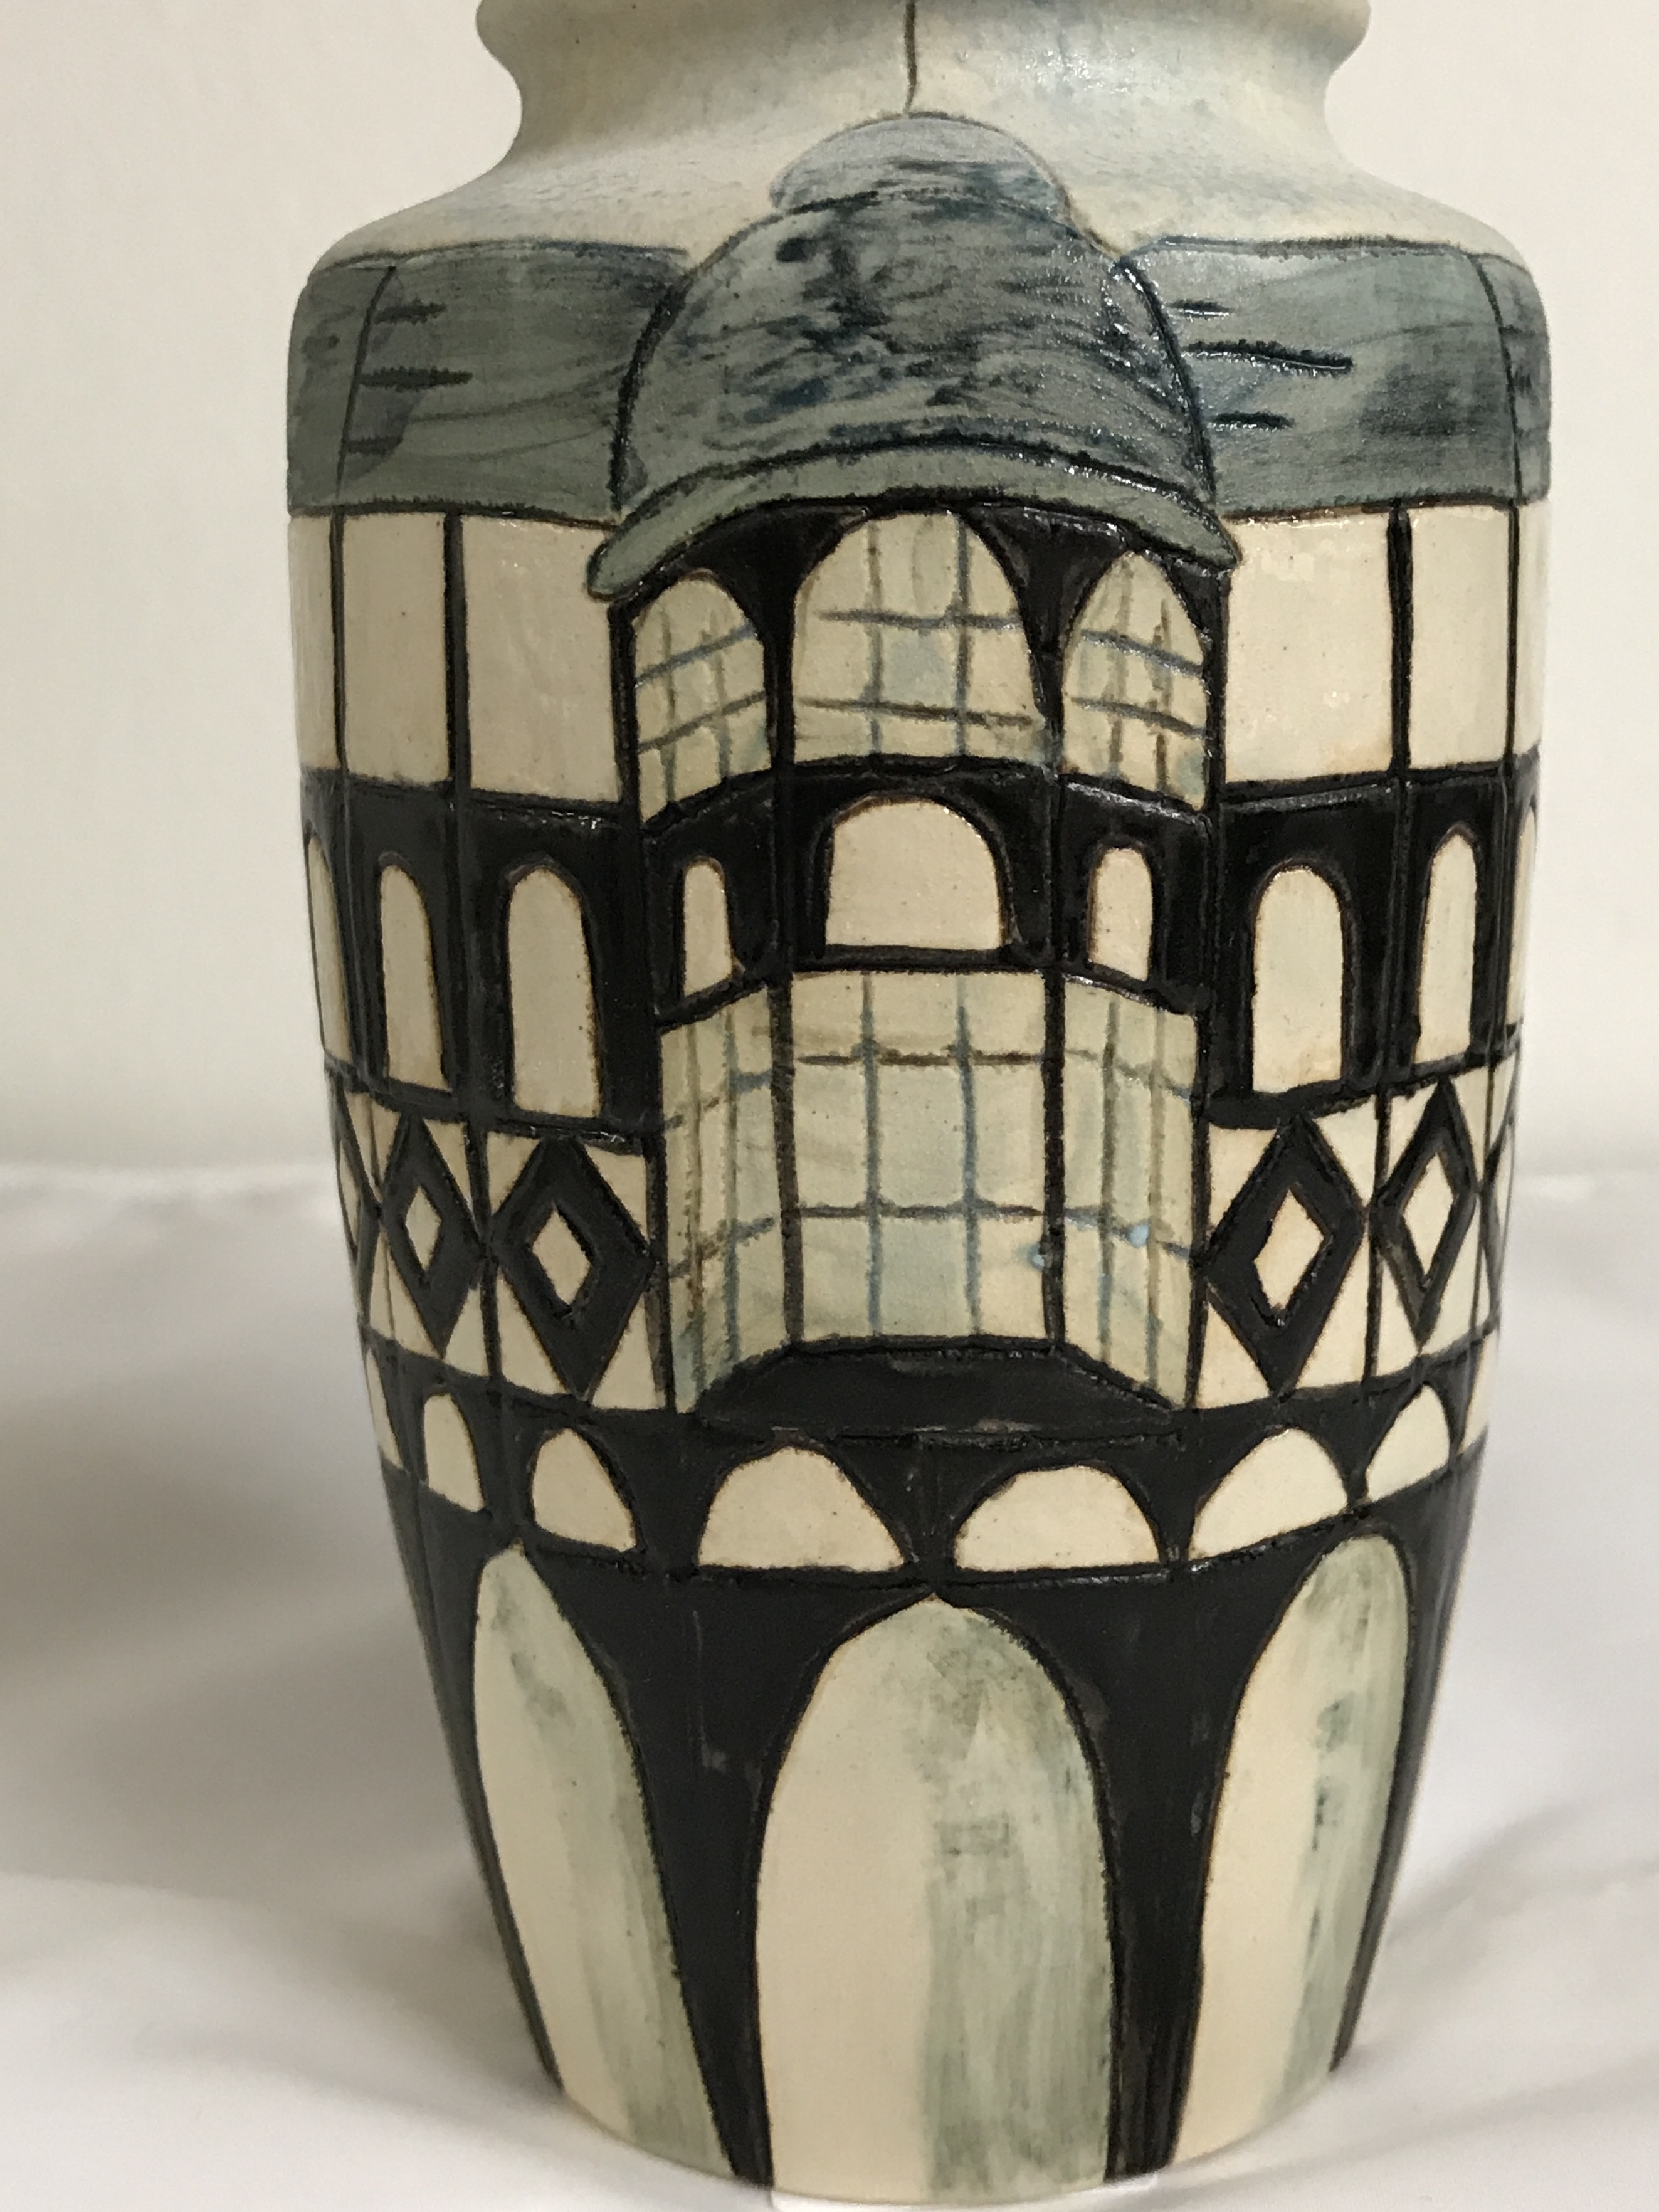 25 Best 20 Inch Vases Cheap 2024 free download 20 inch vases cheap of burslem pottery designed vase shop stoke on trent pertaining to this vase depicts the black and white half timber buildings of chester this vase was done as a shop dem